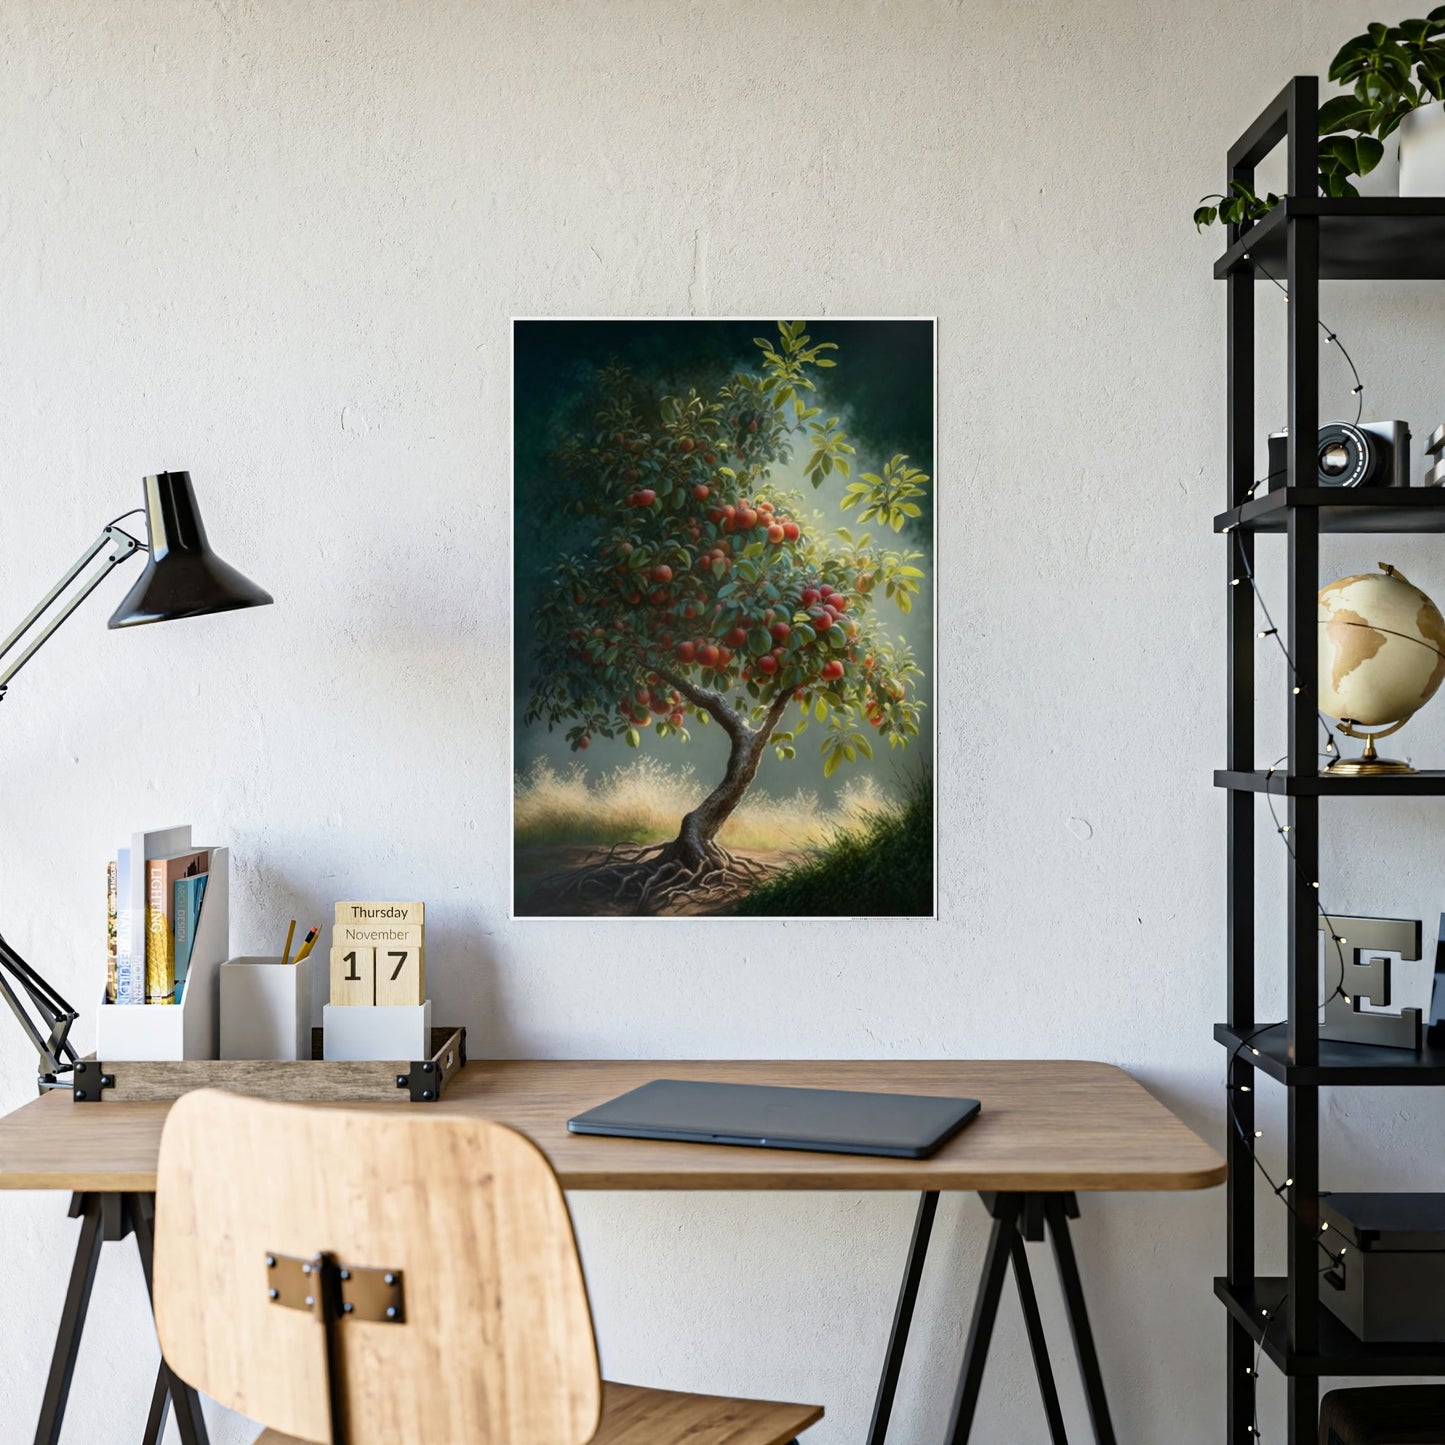 Apple Trees in the Meadow: Canvas Wall Art Print on Canvas of Rural Scenery